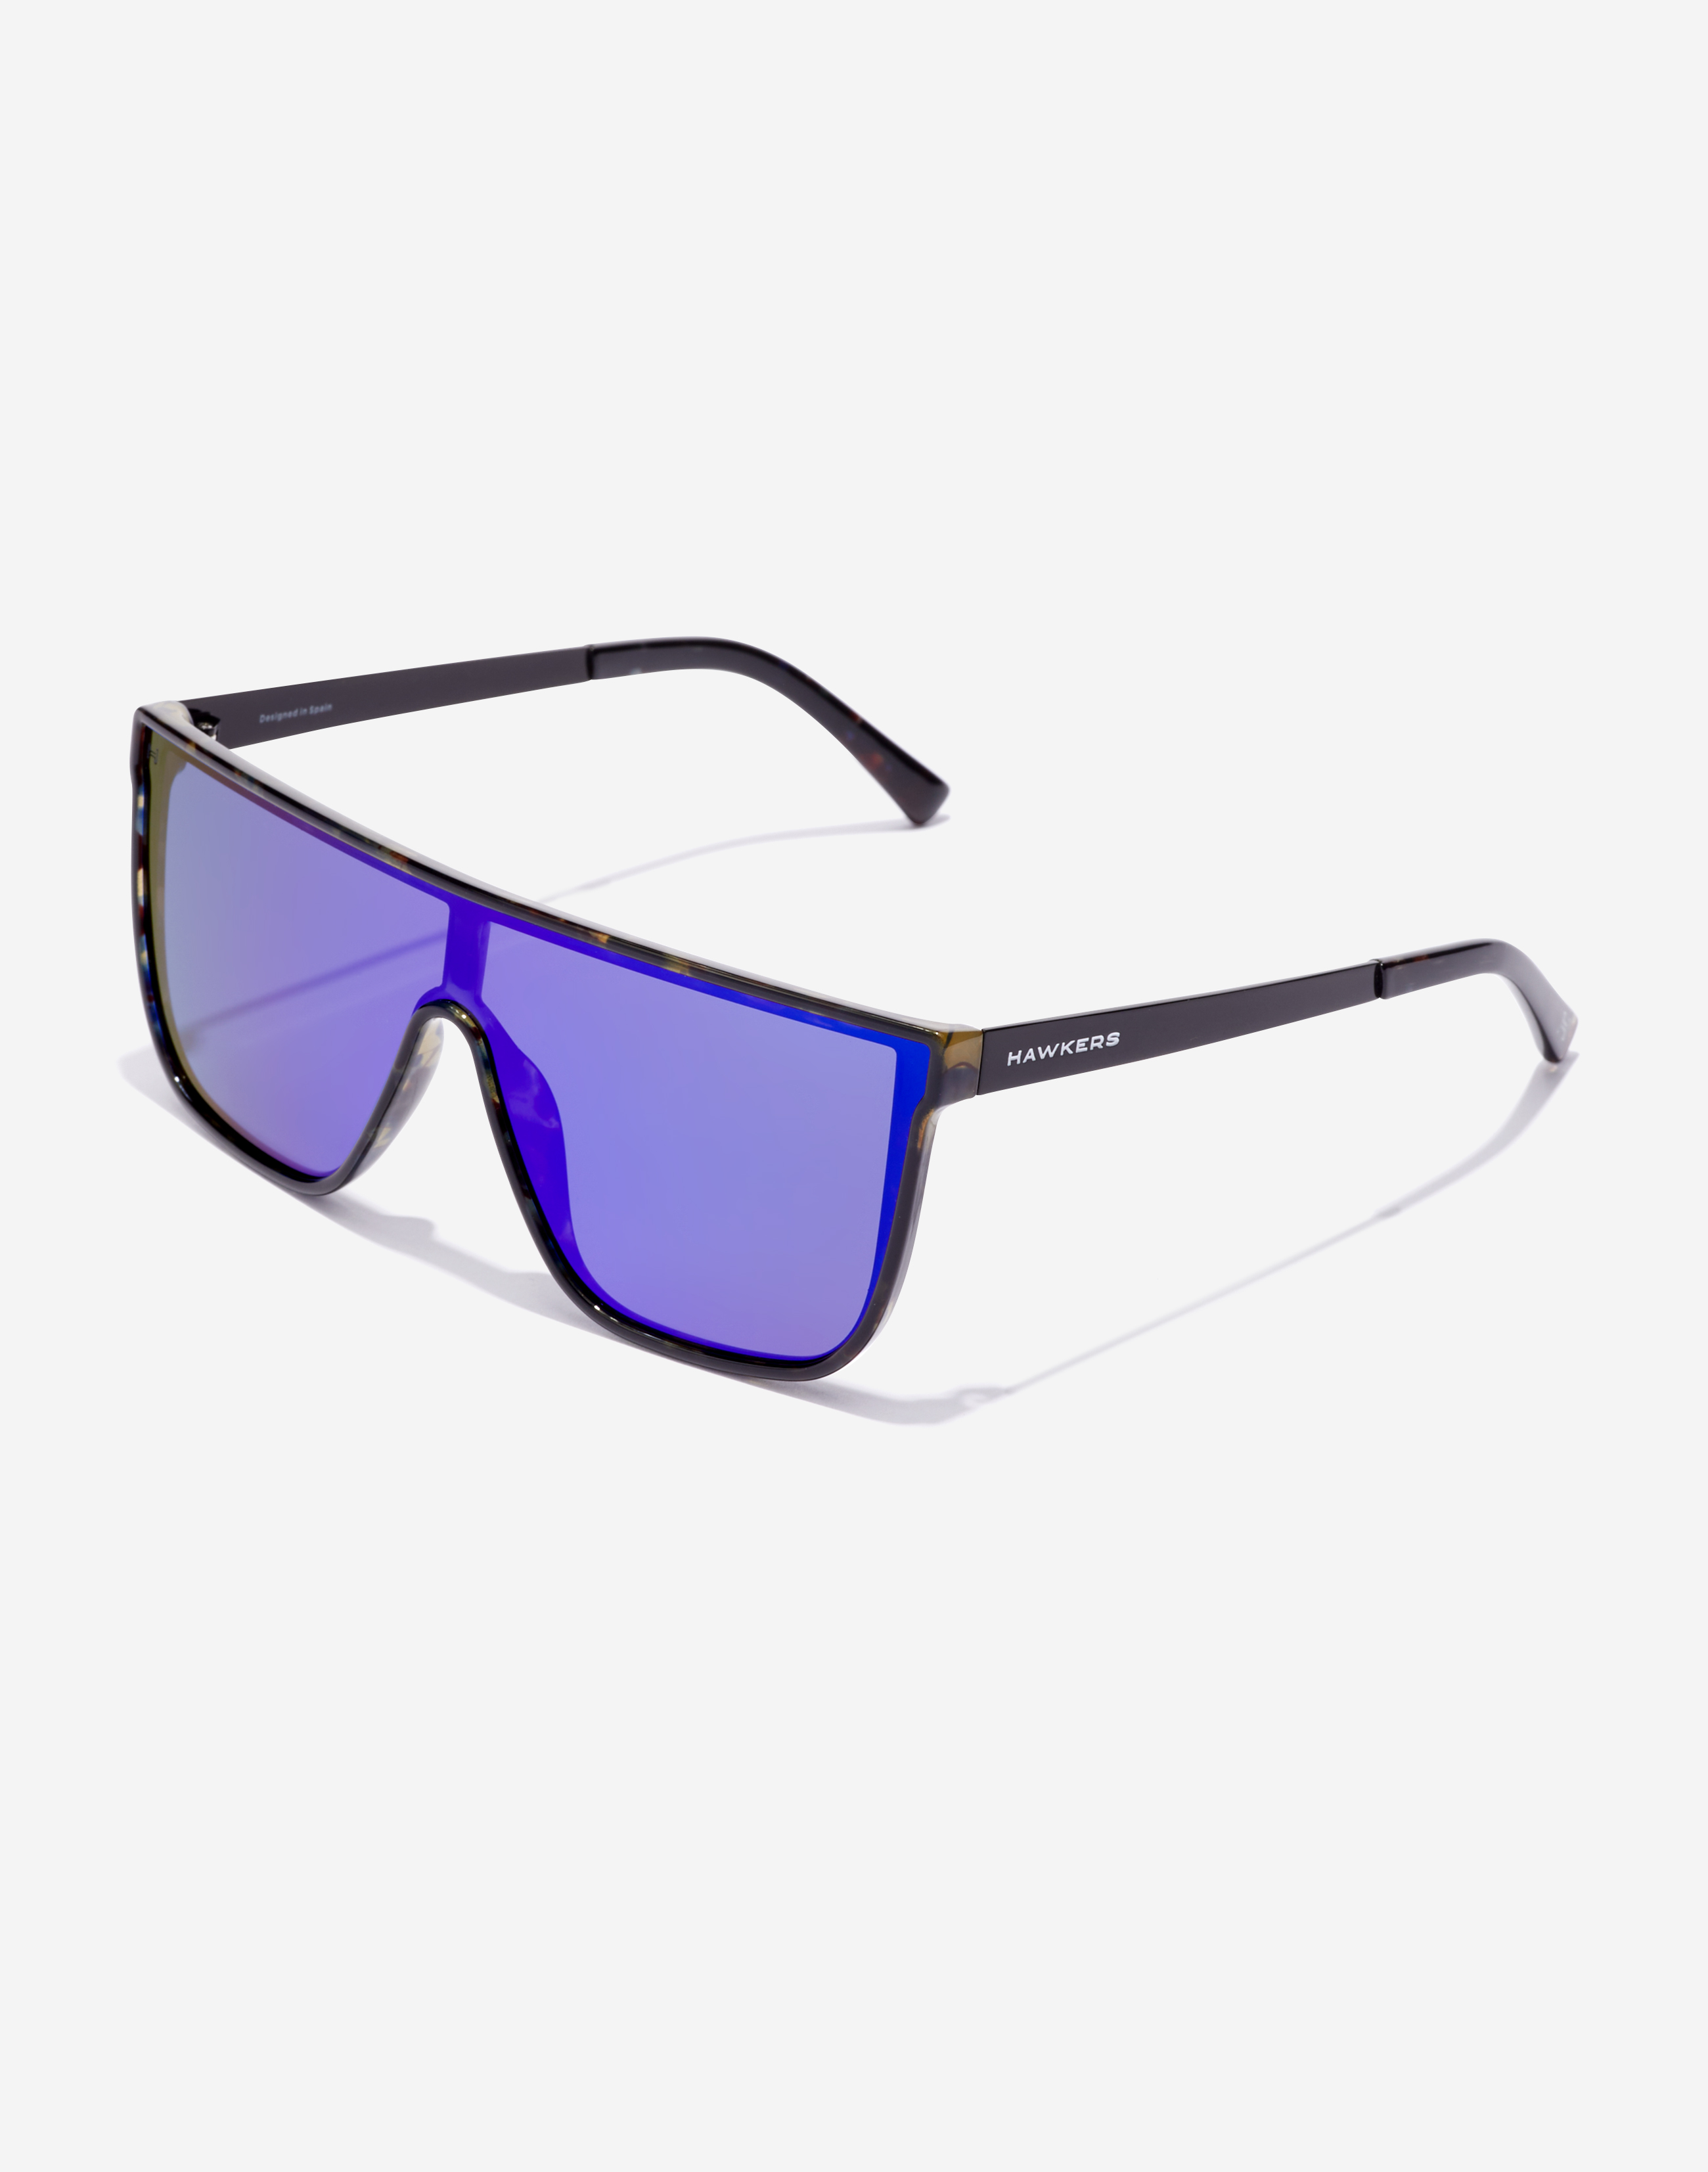 Hawkers WEED - POLARIZED CAREY CLEAR BLUE master